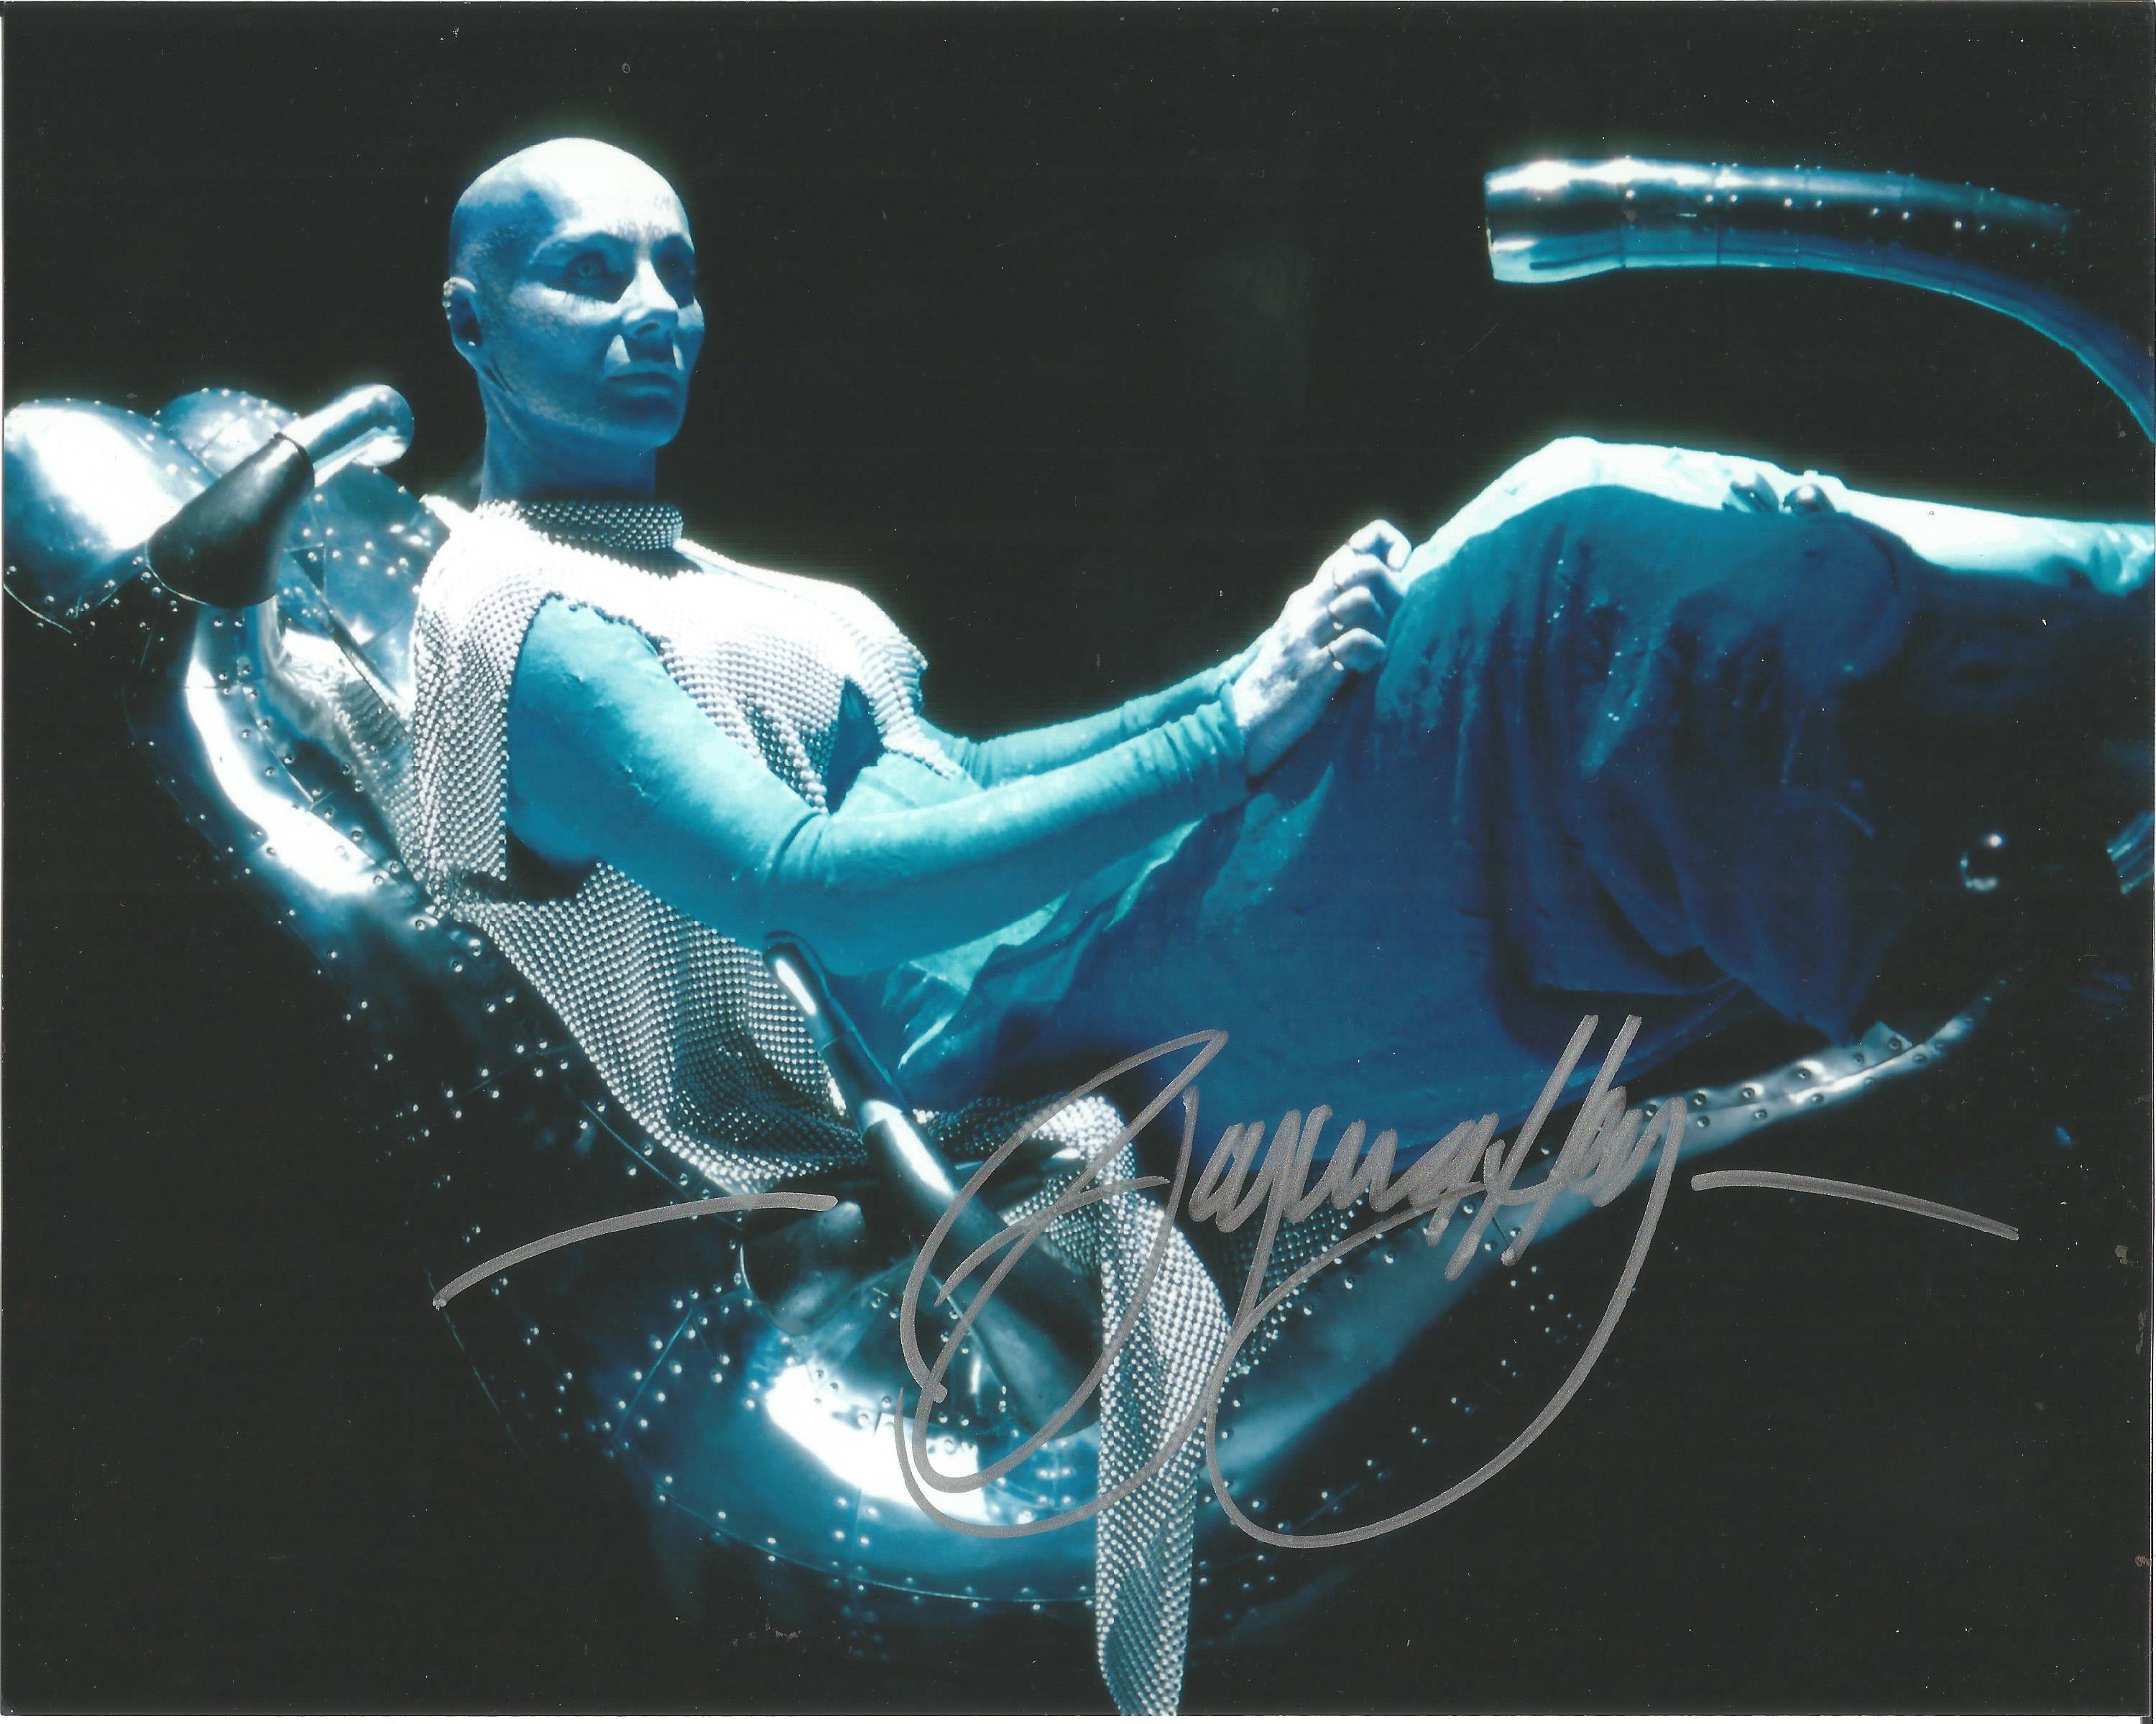 Virginia Hey as Zhaan on Farscape Autographed Picture 